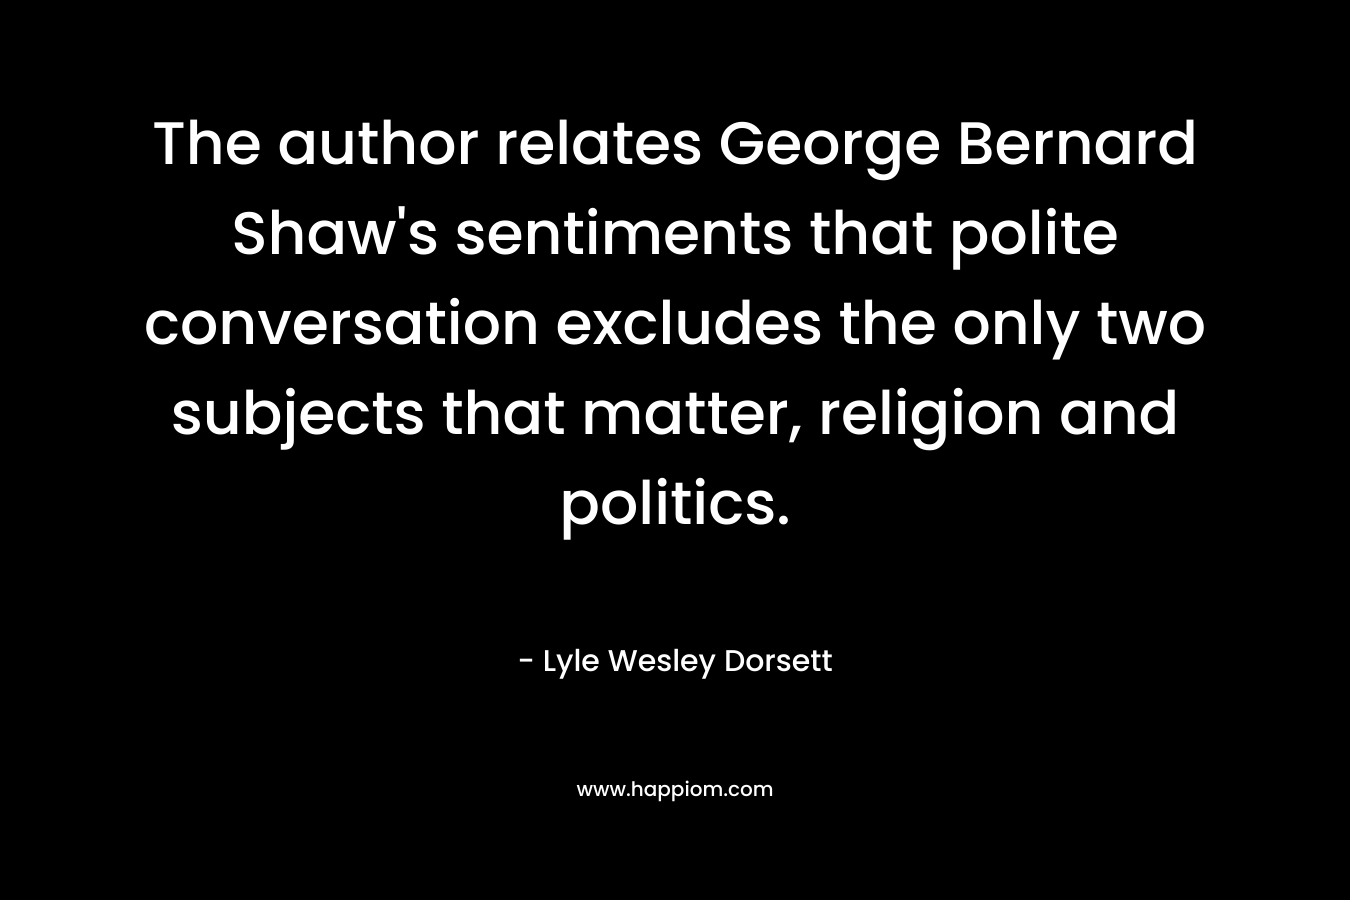 The author relates George Bernard Shaw's sentiments that polite conversation excludes the only two subjects that matter, religion and politics.